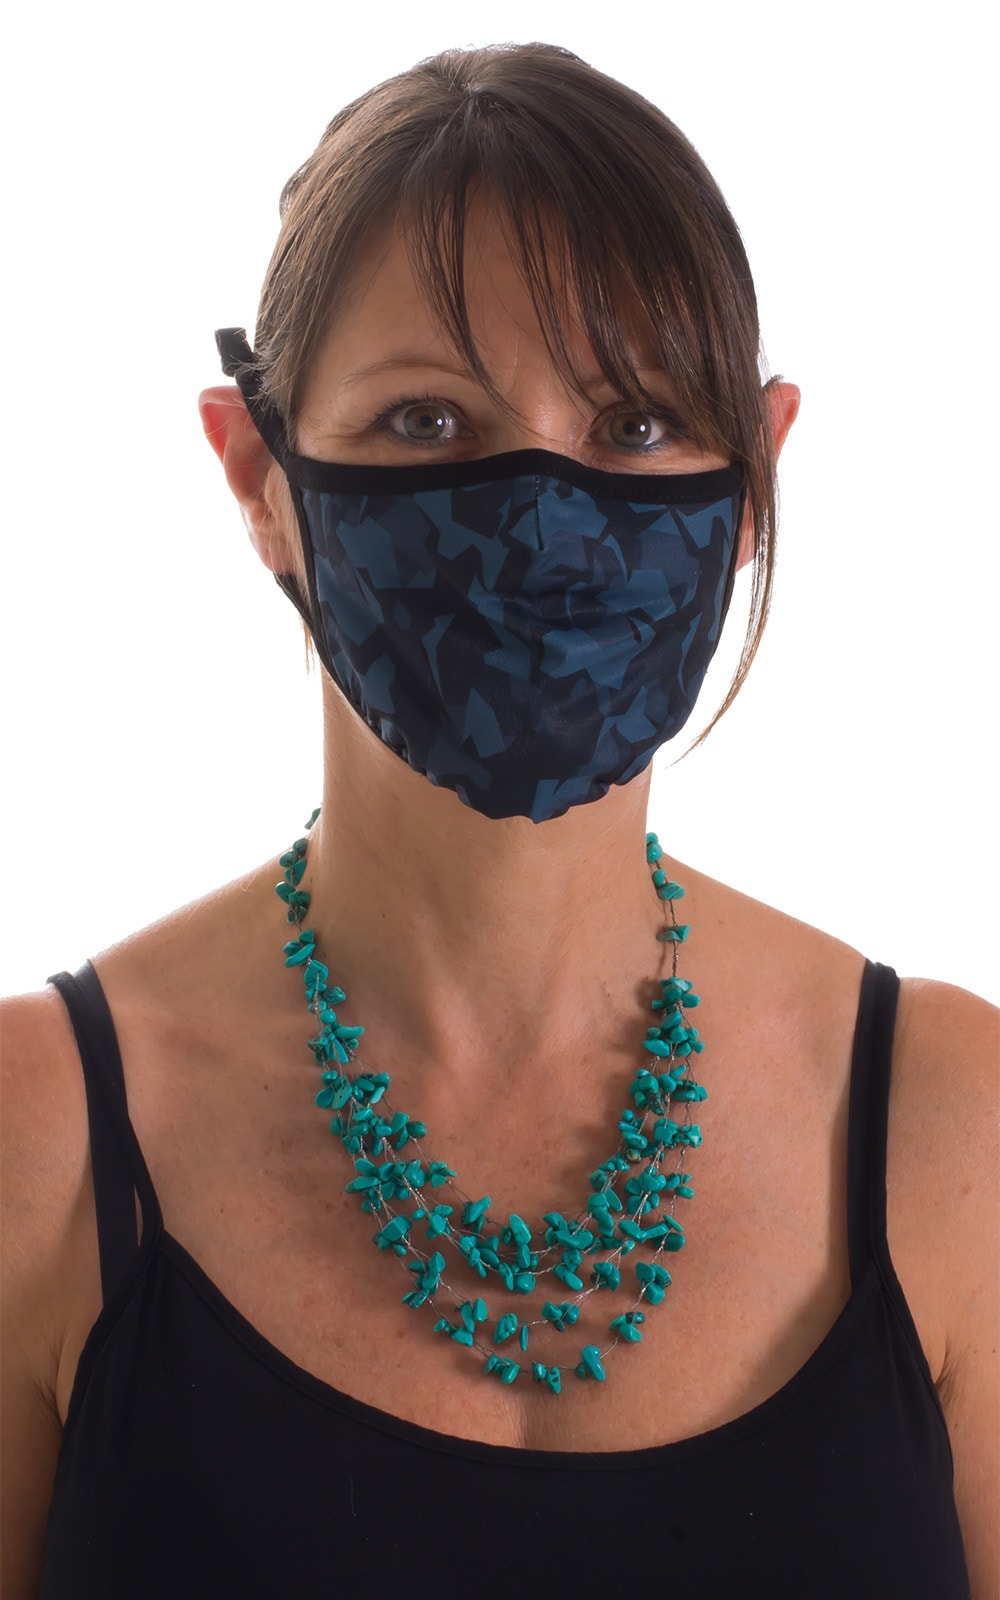 Camo N95 3-ply face mask 5